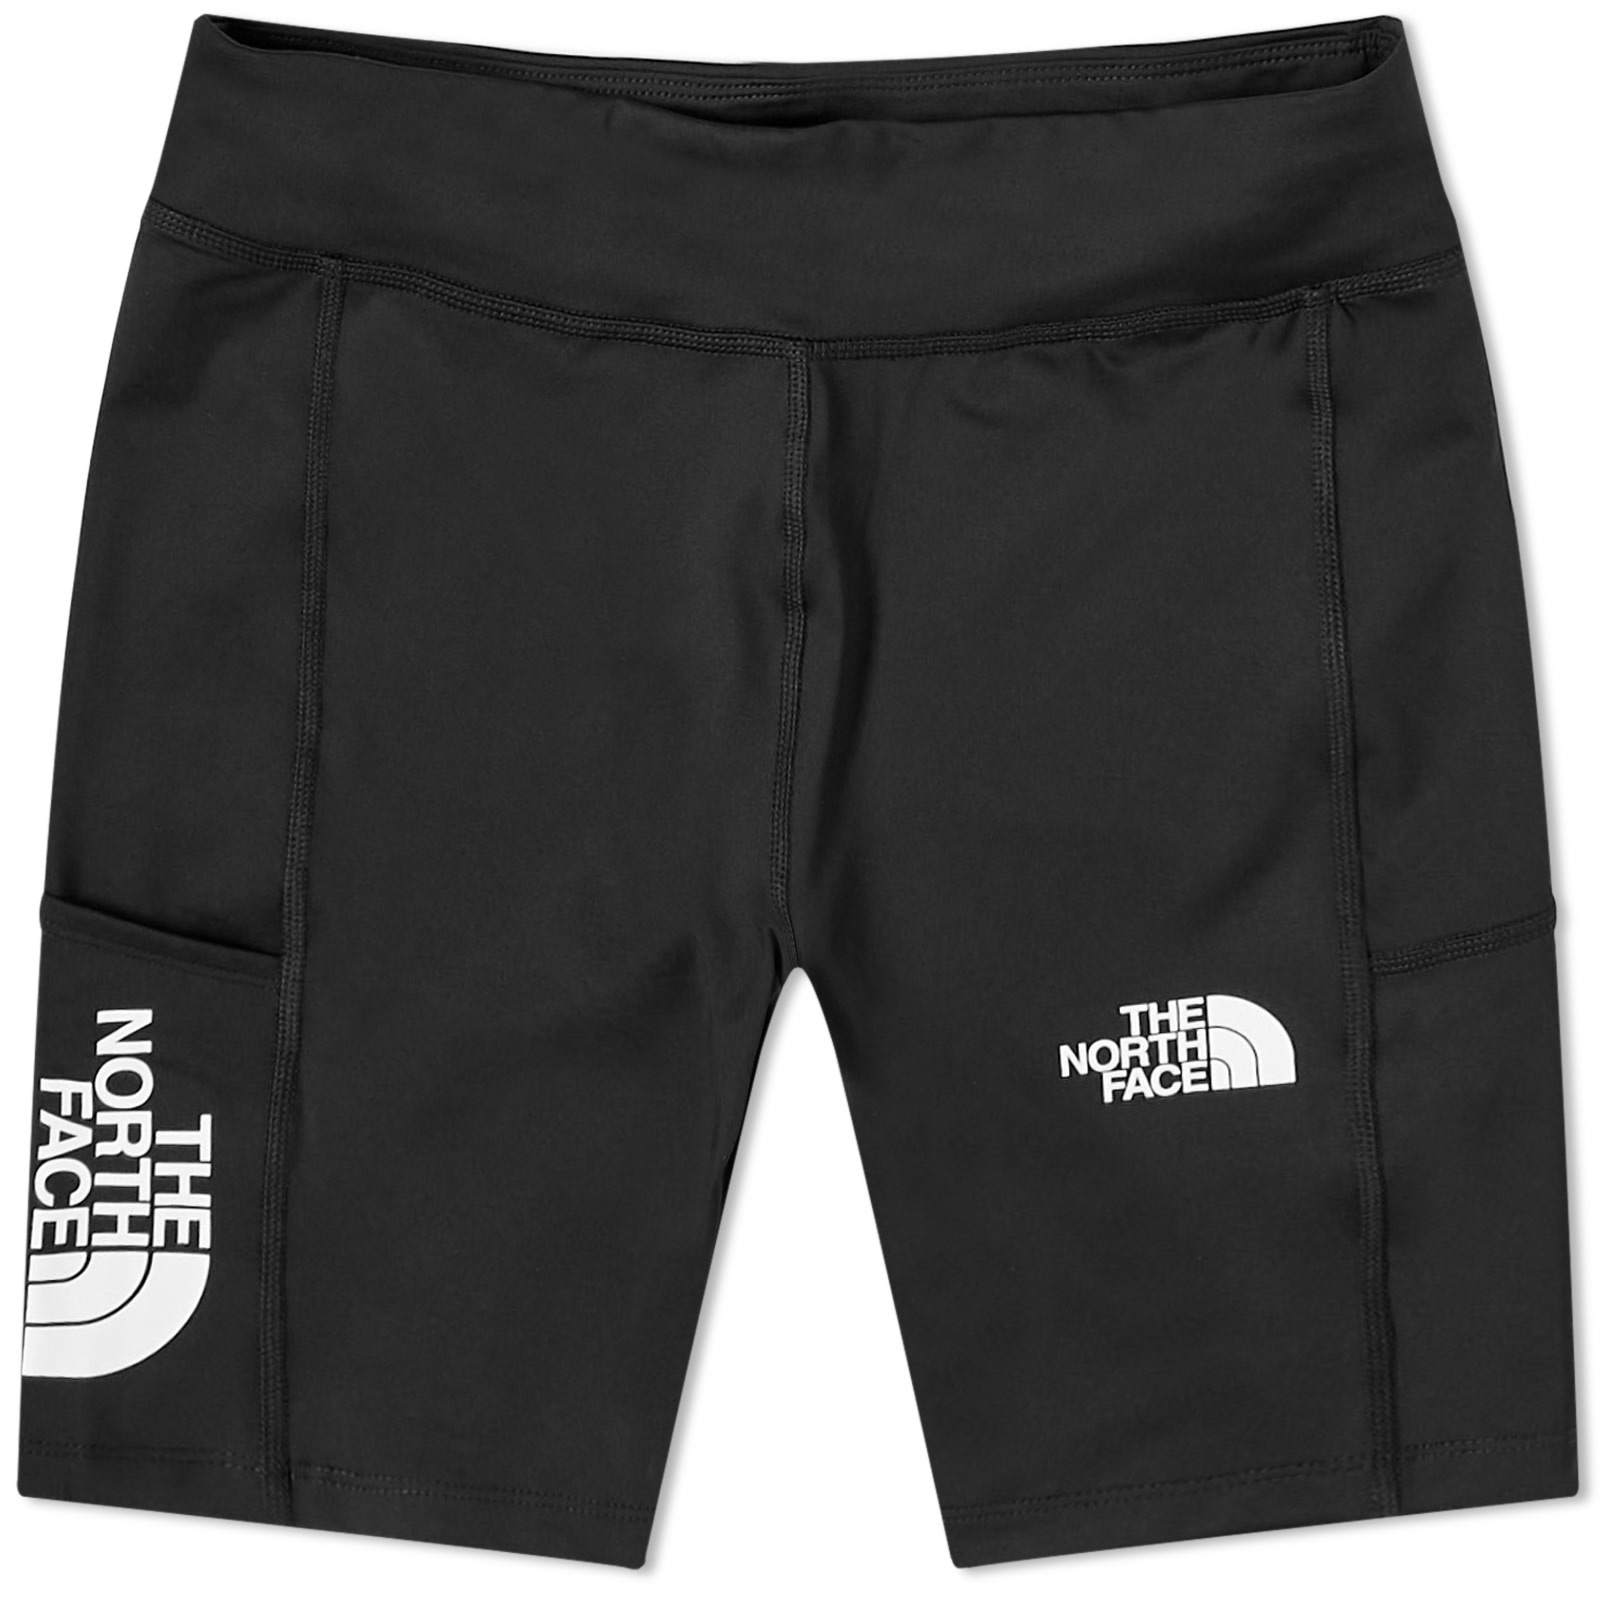 The North Face Poly Knit Shorts - 1